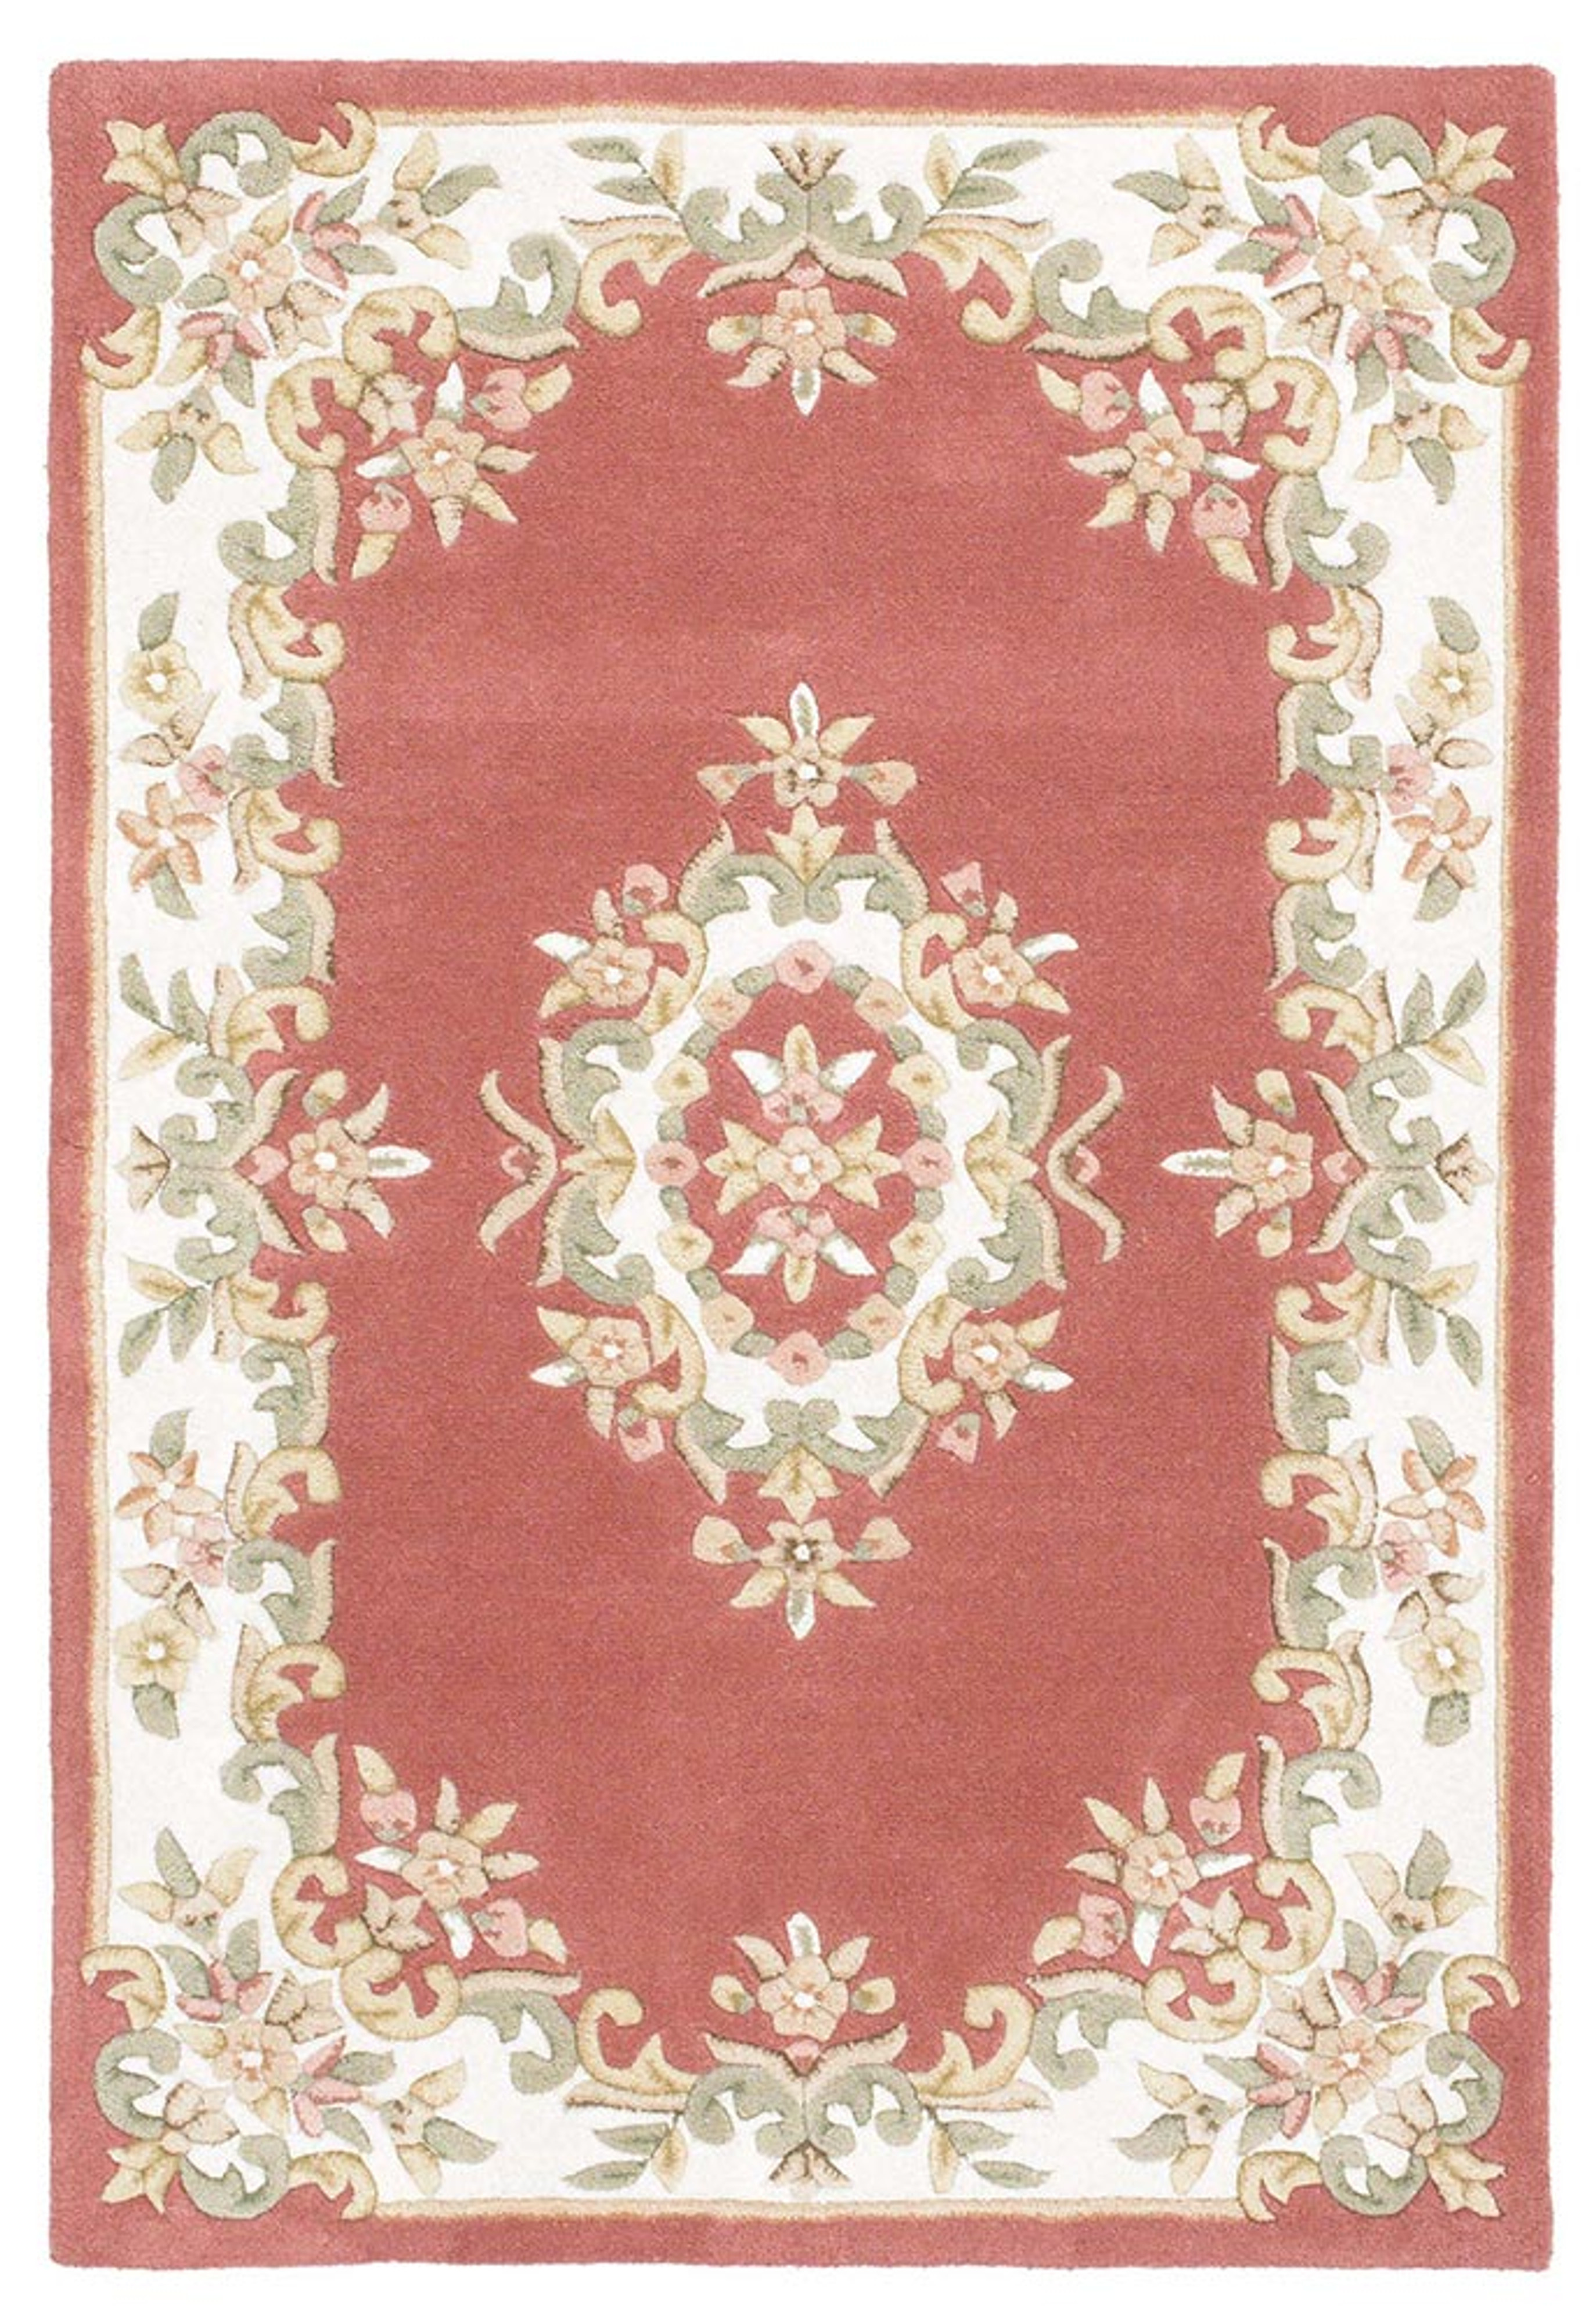 Rose Blue Wool Carved French Aubusson Floor Round Rug 120x120cm